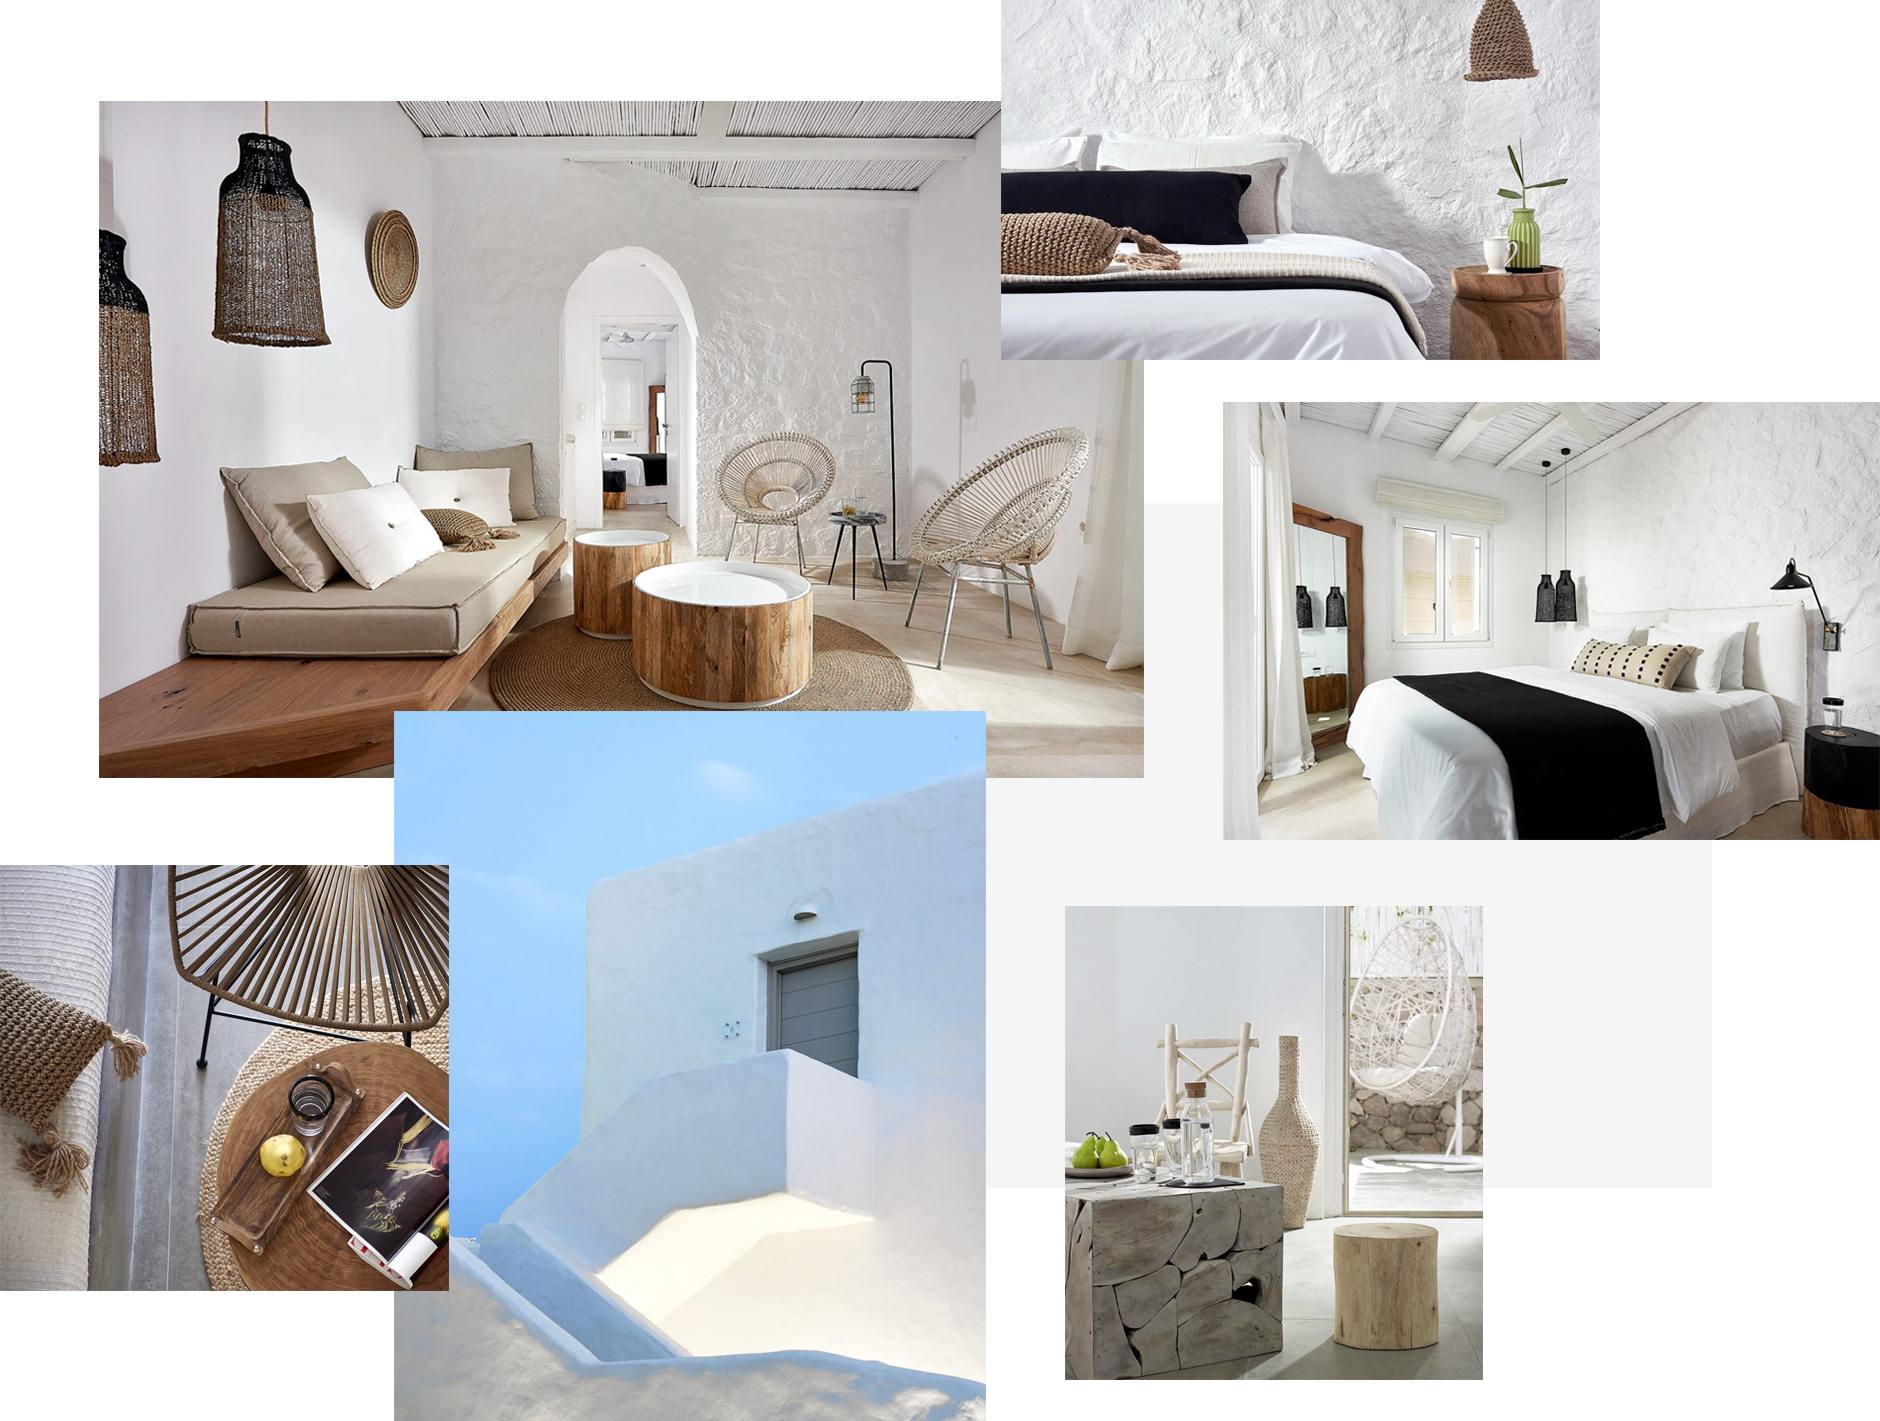 Delmar Apartments & Suites, Milos. The ultimate guide to the best chic hotels in Milos, Greece by Travelplusstyle.com